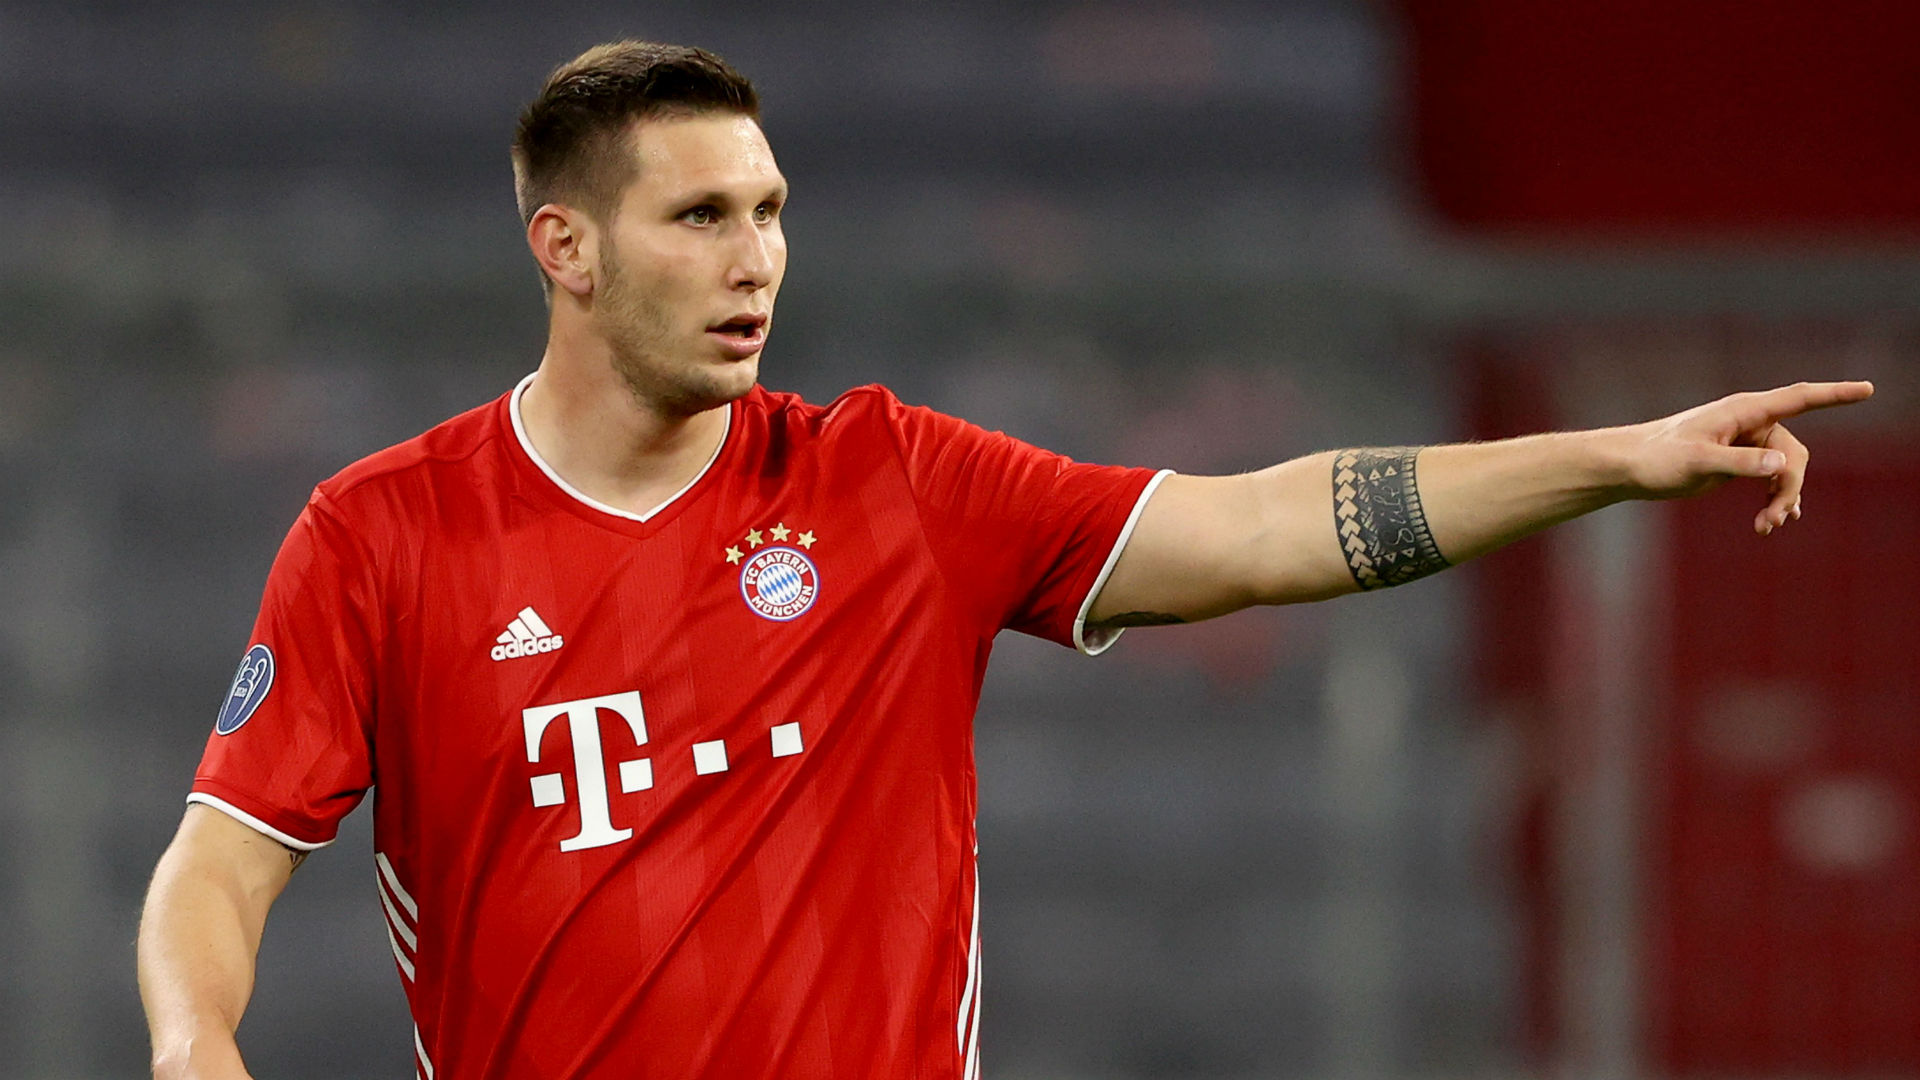 Reports | Niklas Sule to leave Bayern Munich and sign for Borussia Dortmund on free-transfer